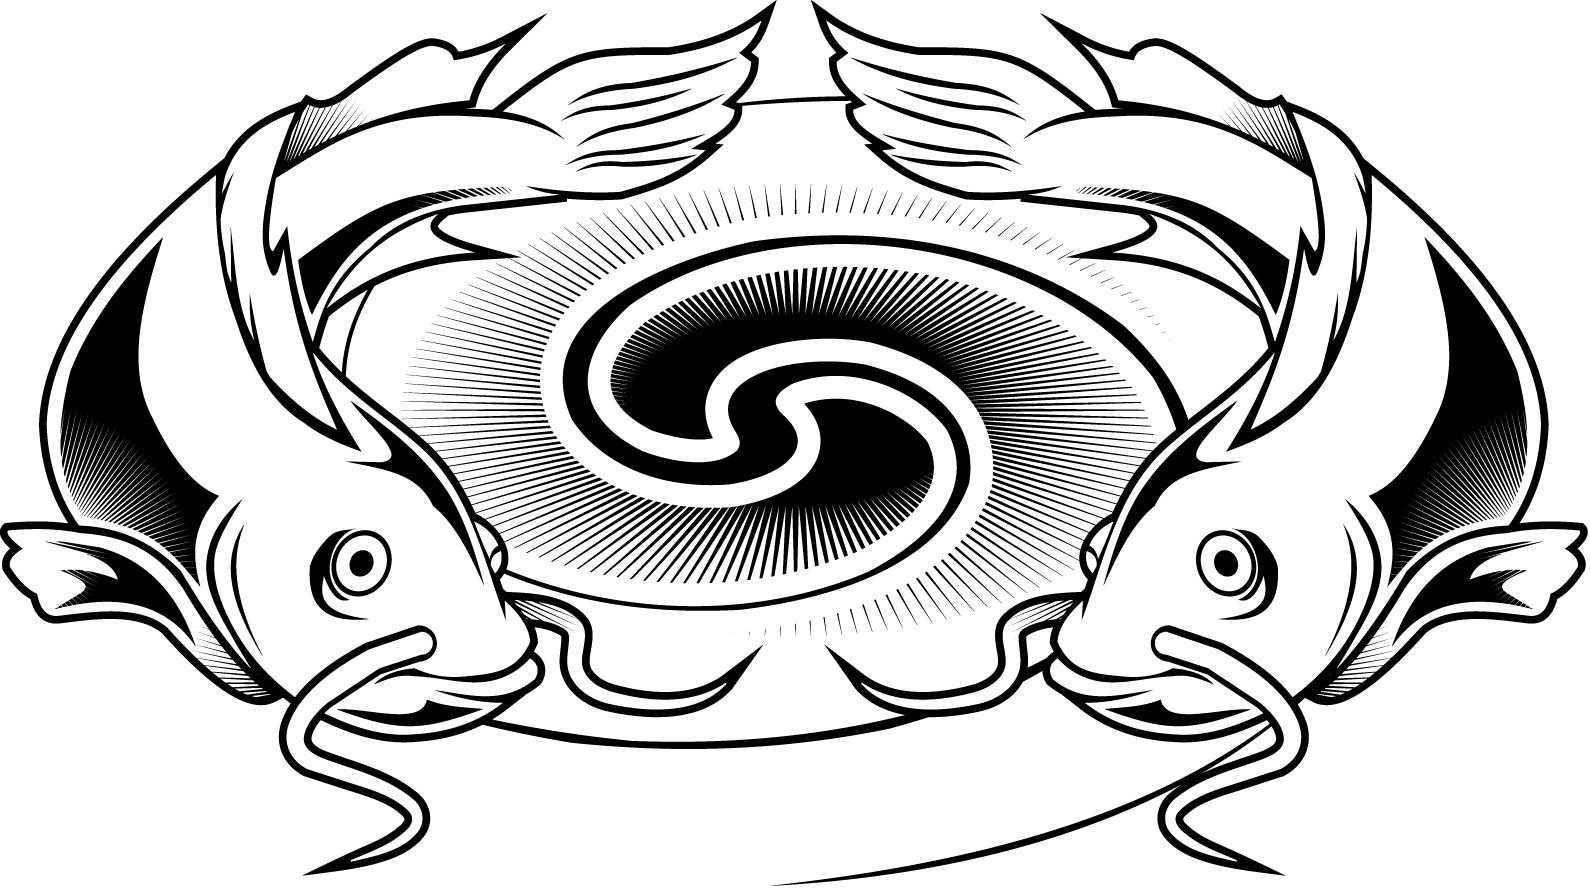 colouring pages of a catfish tattoo design for kids - Coloring ...